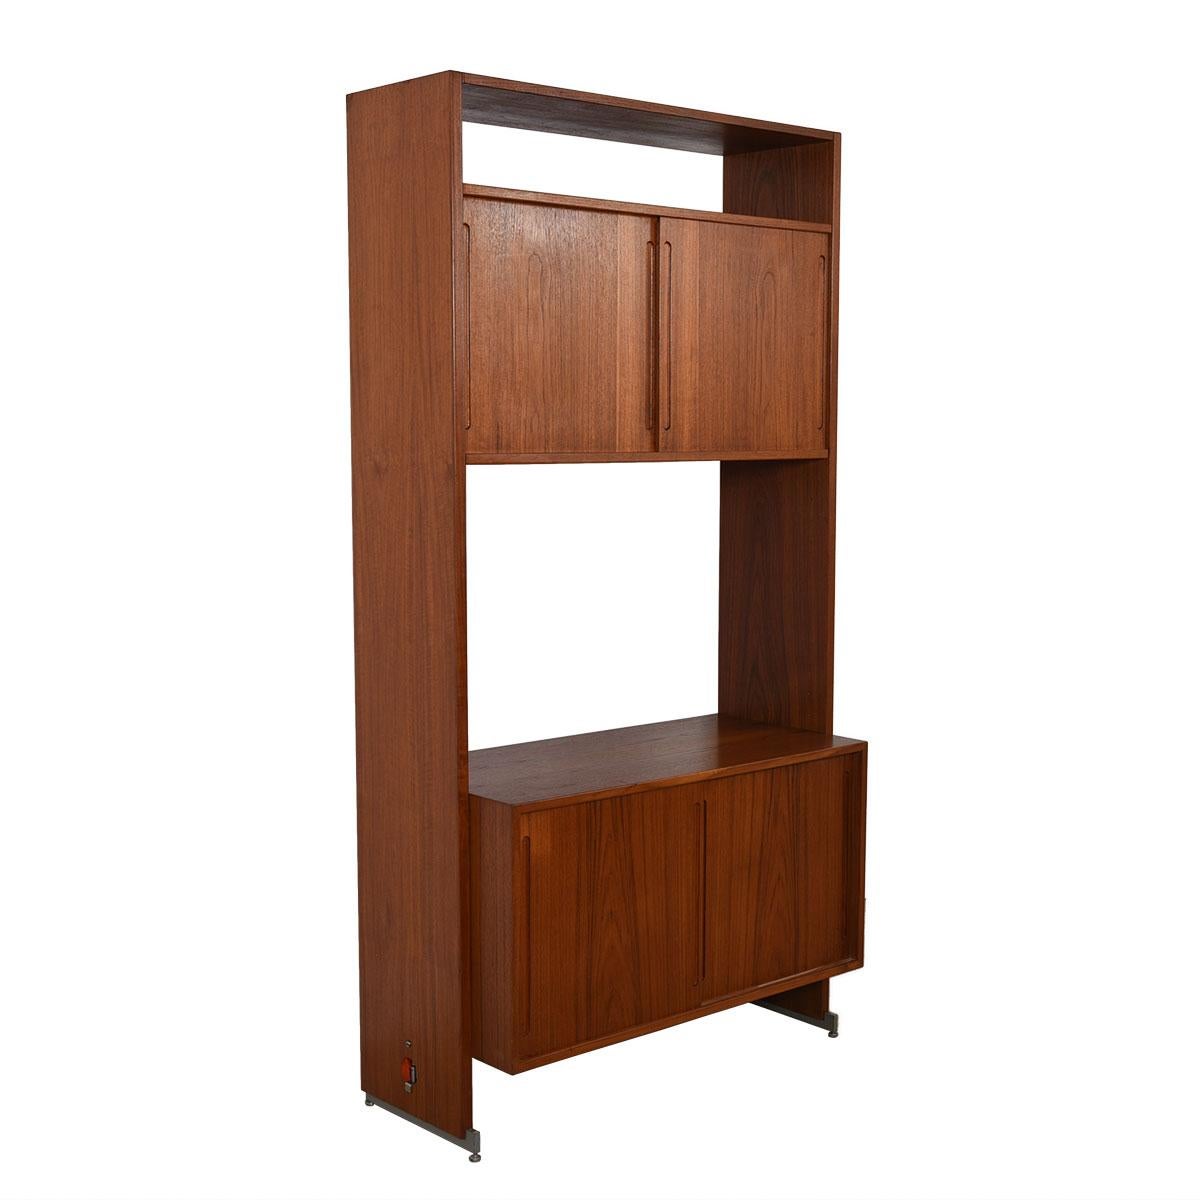 Danish Teak Single Column Wall Unit / Room Divider by Hans Wegner

Use alone or add to your wall system with this single column in teak designed by Hans Wegner.

Piece is finished on all sides.

This unit features two closed storage cabinets, both